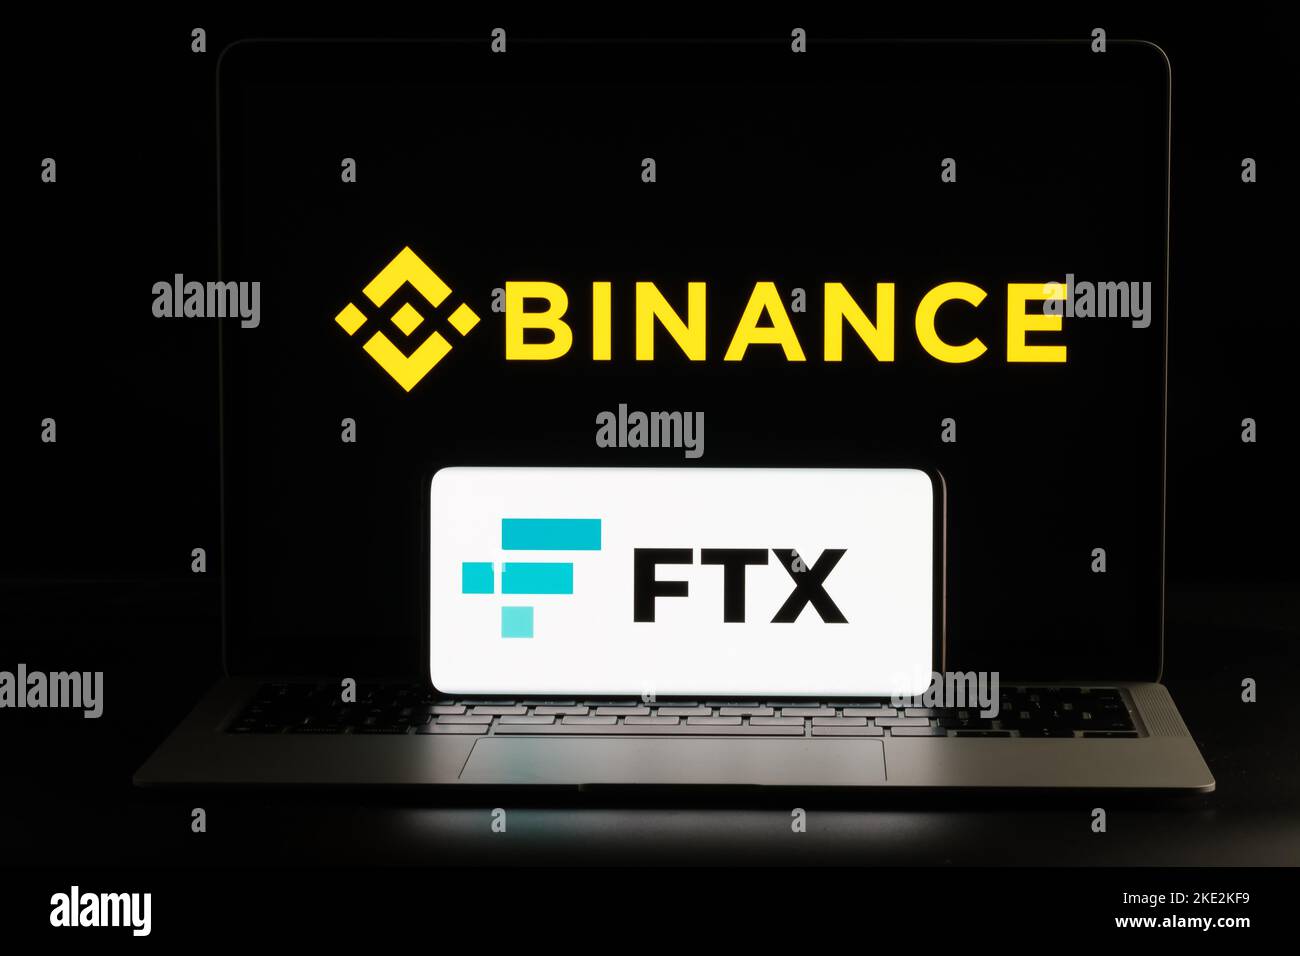 Binance and FTX Cryptocurrency Exchange merger concept. FTX logo seen on smartphone and blurred Binance logo on the laptop. Stafford, United Kindom, N Stock Photo